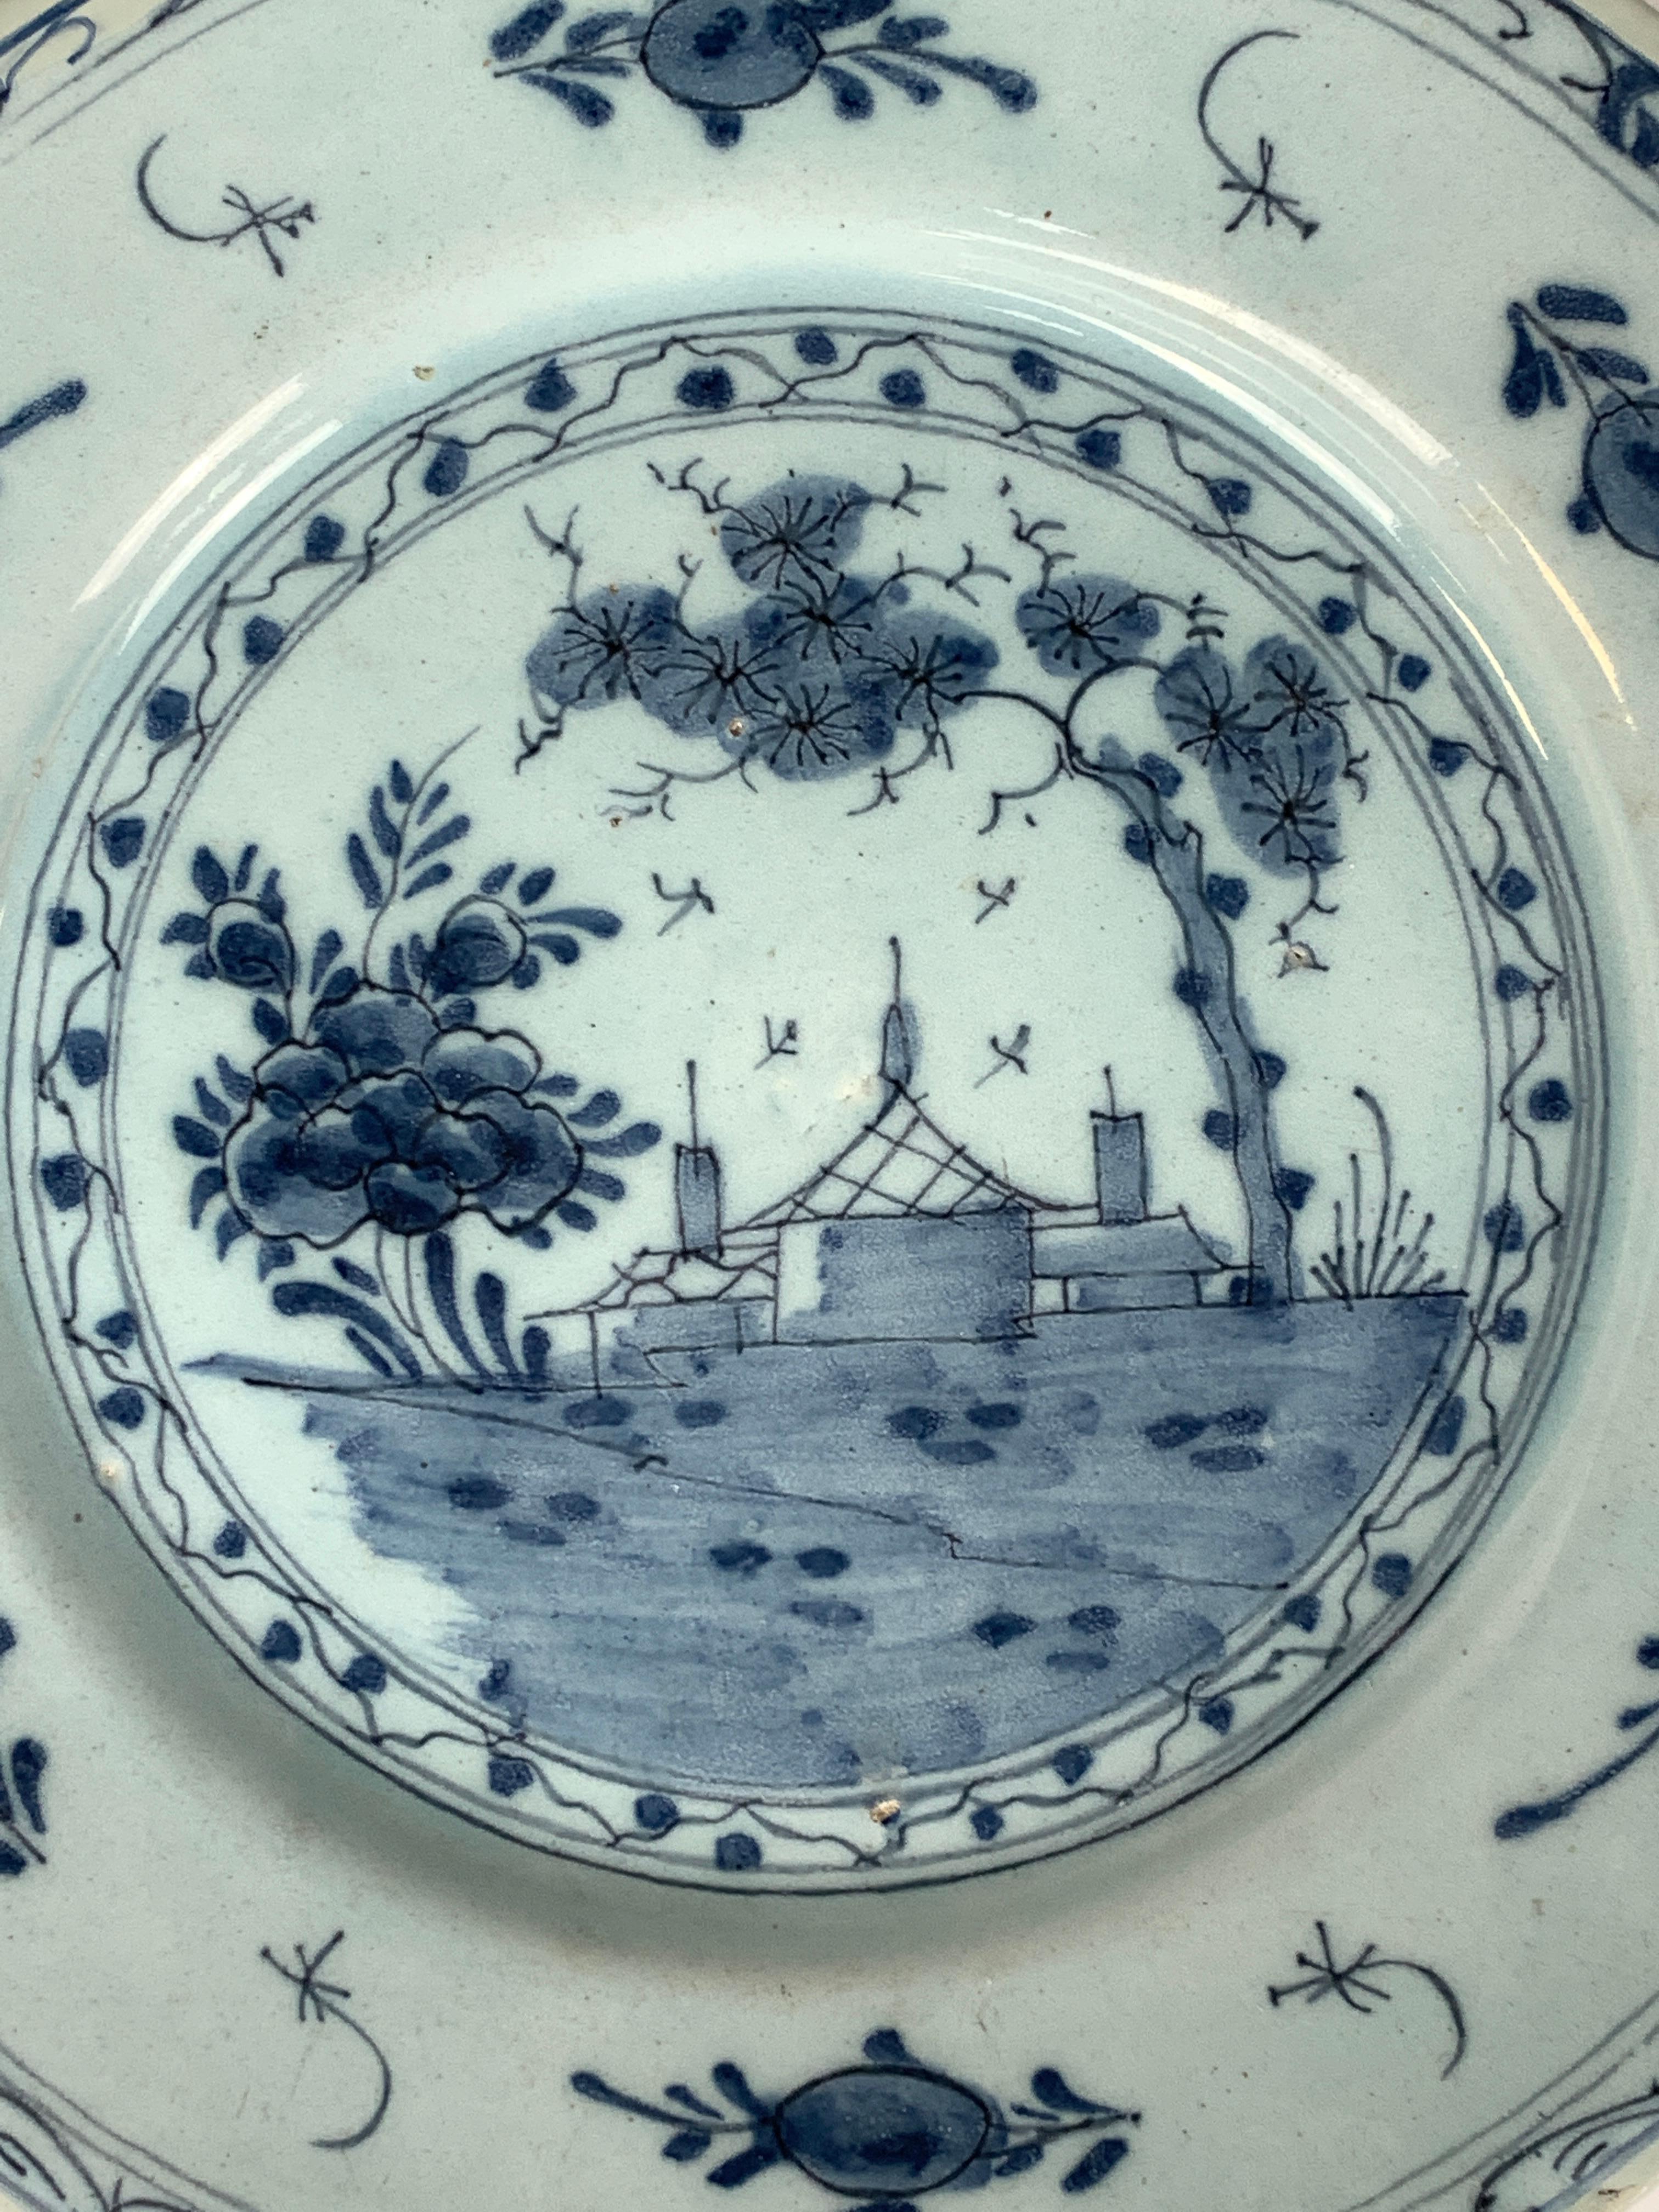 This Delft blue and white dish was hand-painted in England in the 18th century circa 1760. 
The painting is quite naive but eye-catching. 
In the center, we see a large blue ground before three homes, each with a chimney. 
To the left, we see a